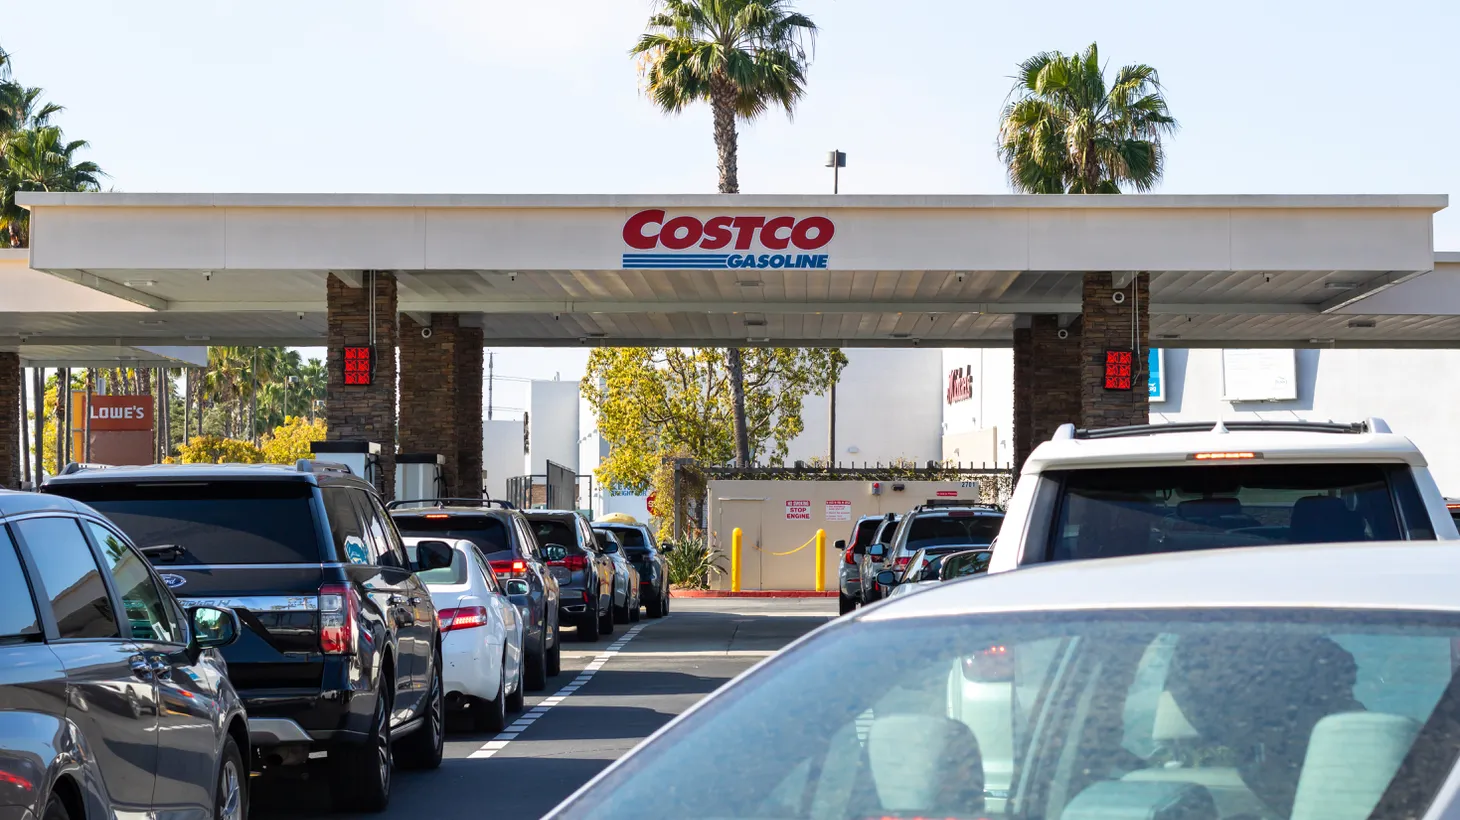 At this Costco in Irvine, California, the lure of low gas prices and good deals on foodstuffs lures countless shoppers.